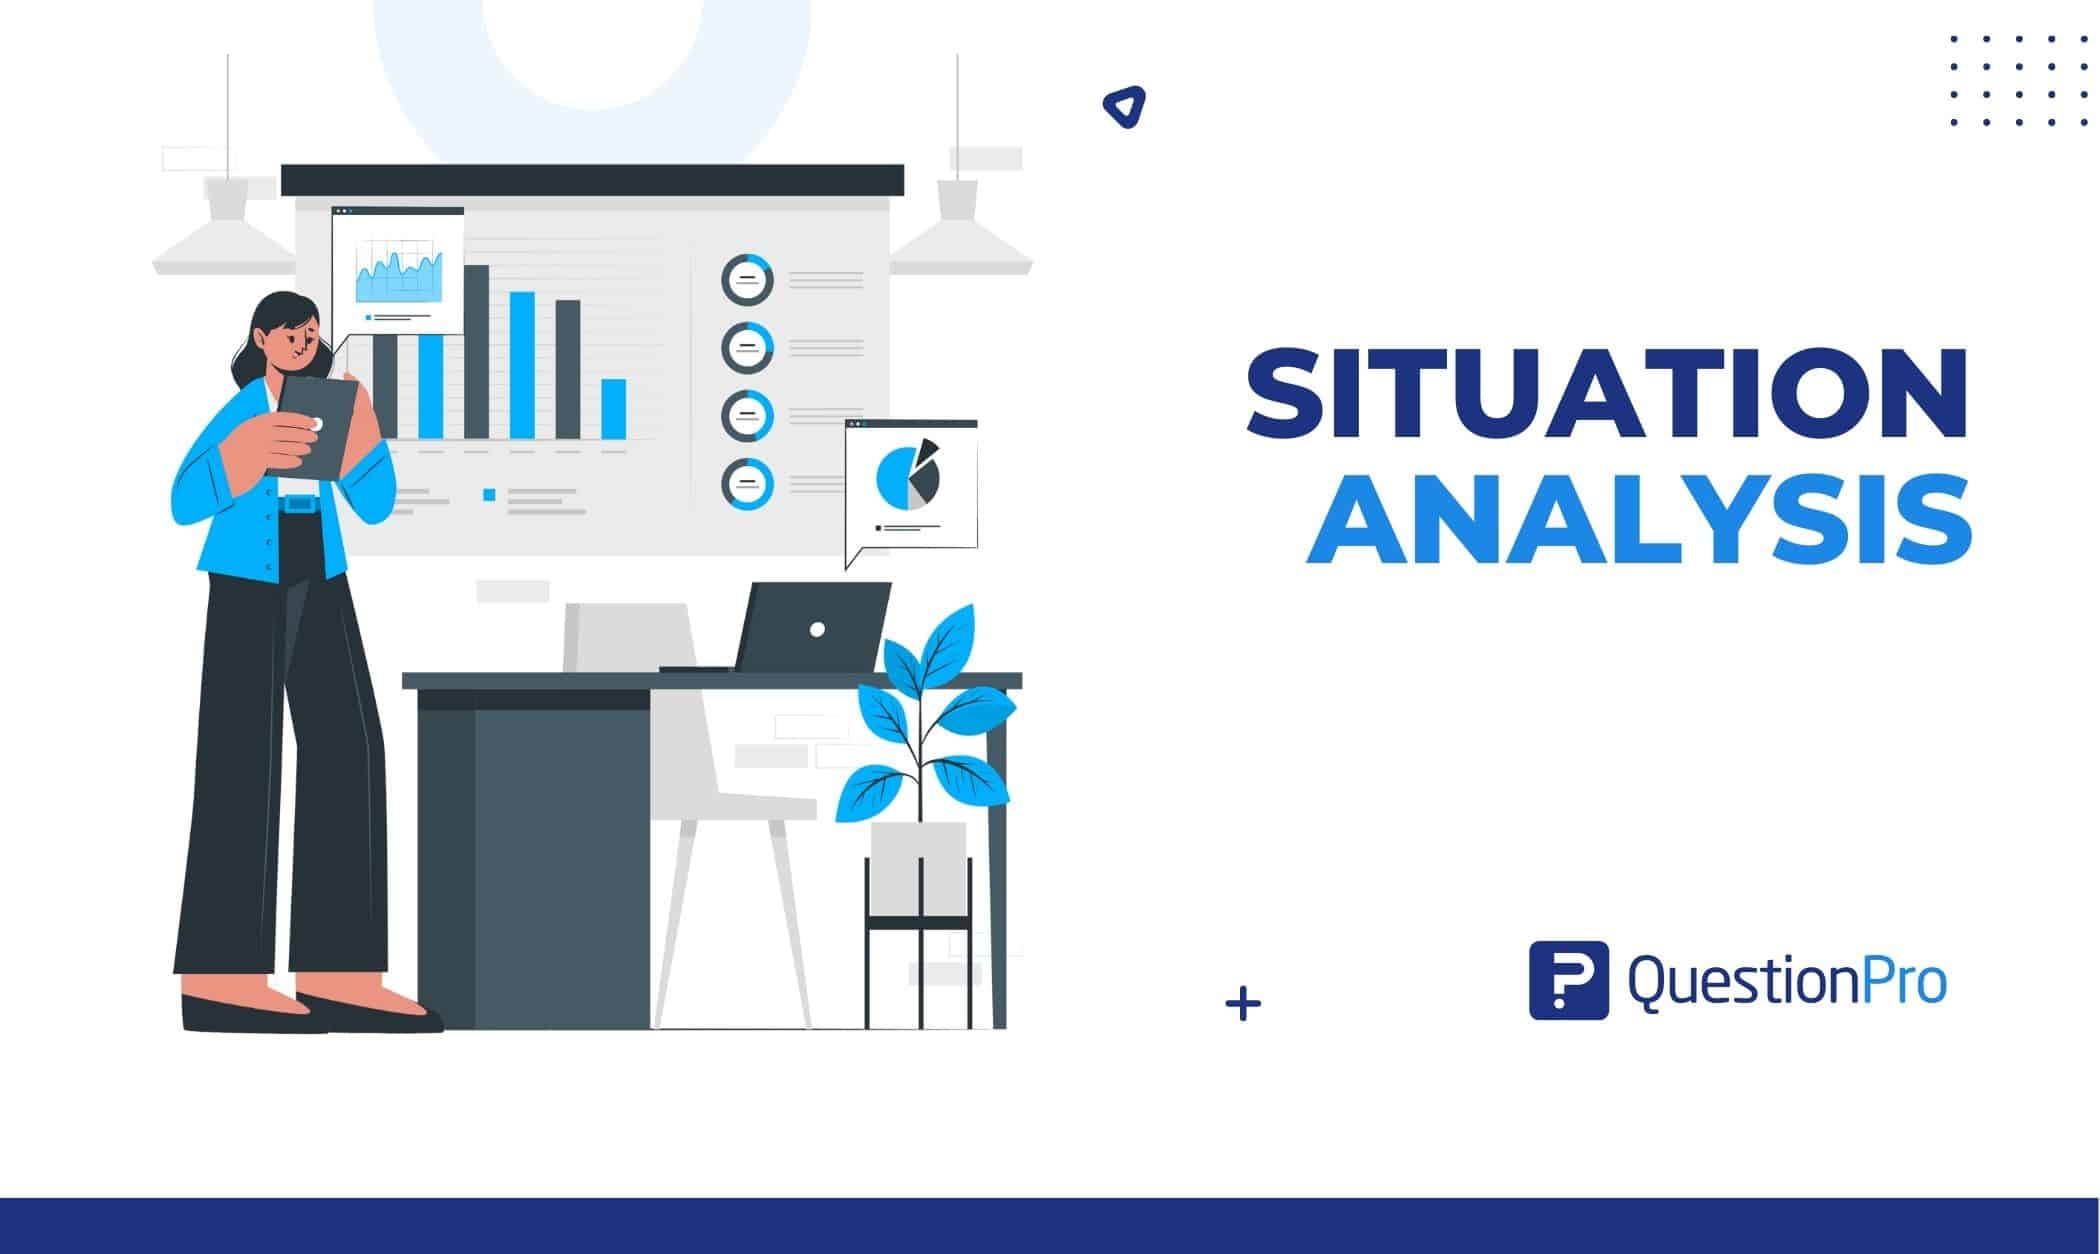 A situation analysis identifies opportunities and problems for your business. But you have to learn how to do this first. Let's discuss it.